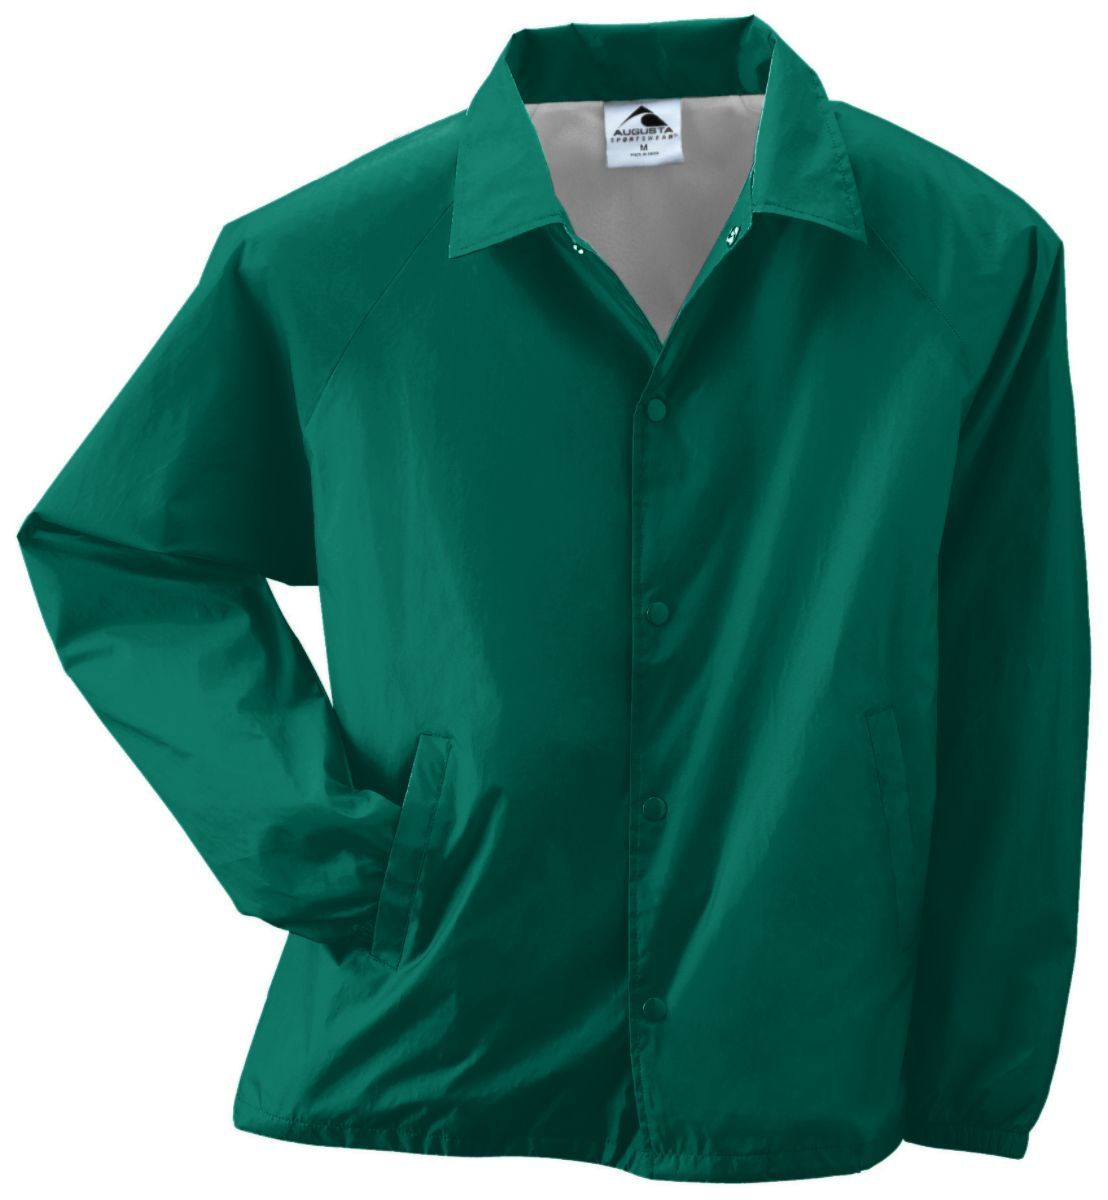 Augusta Sportswear Youth Nylon Coach'S Jacket in Dark Green  -Part of the Youth, Youth-Jacket, Augusta-Products, Outerwear product lines at KanaleyCreations.com